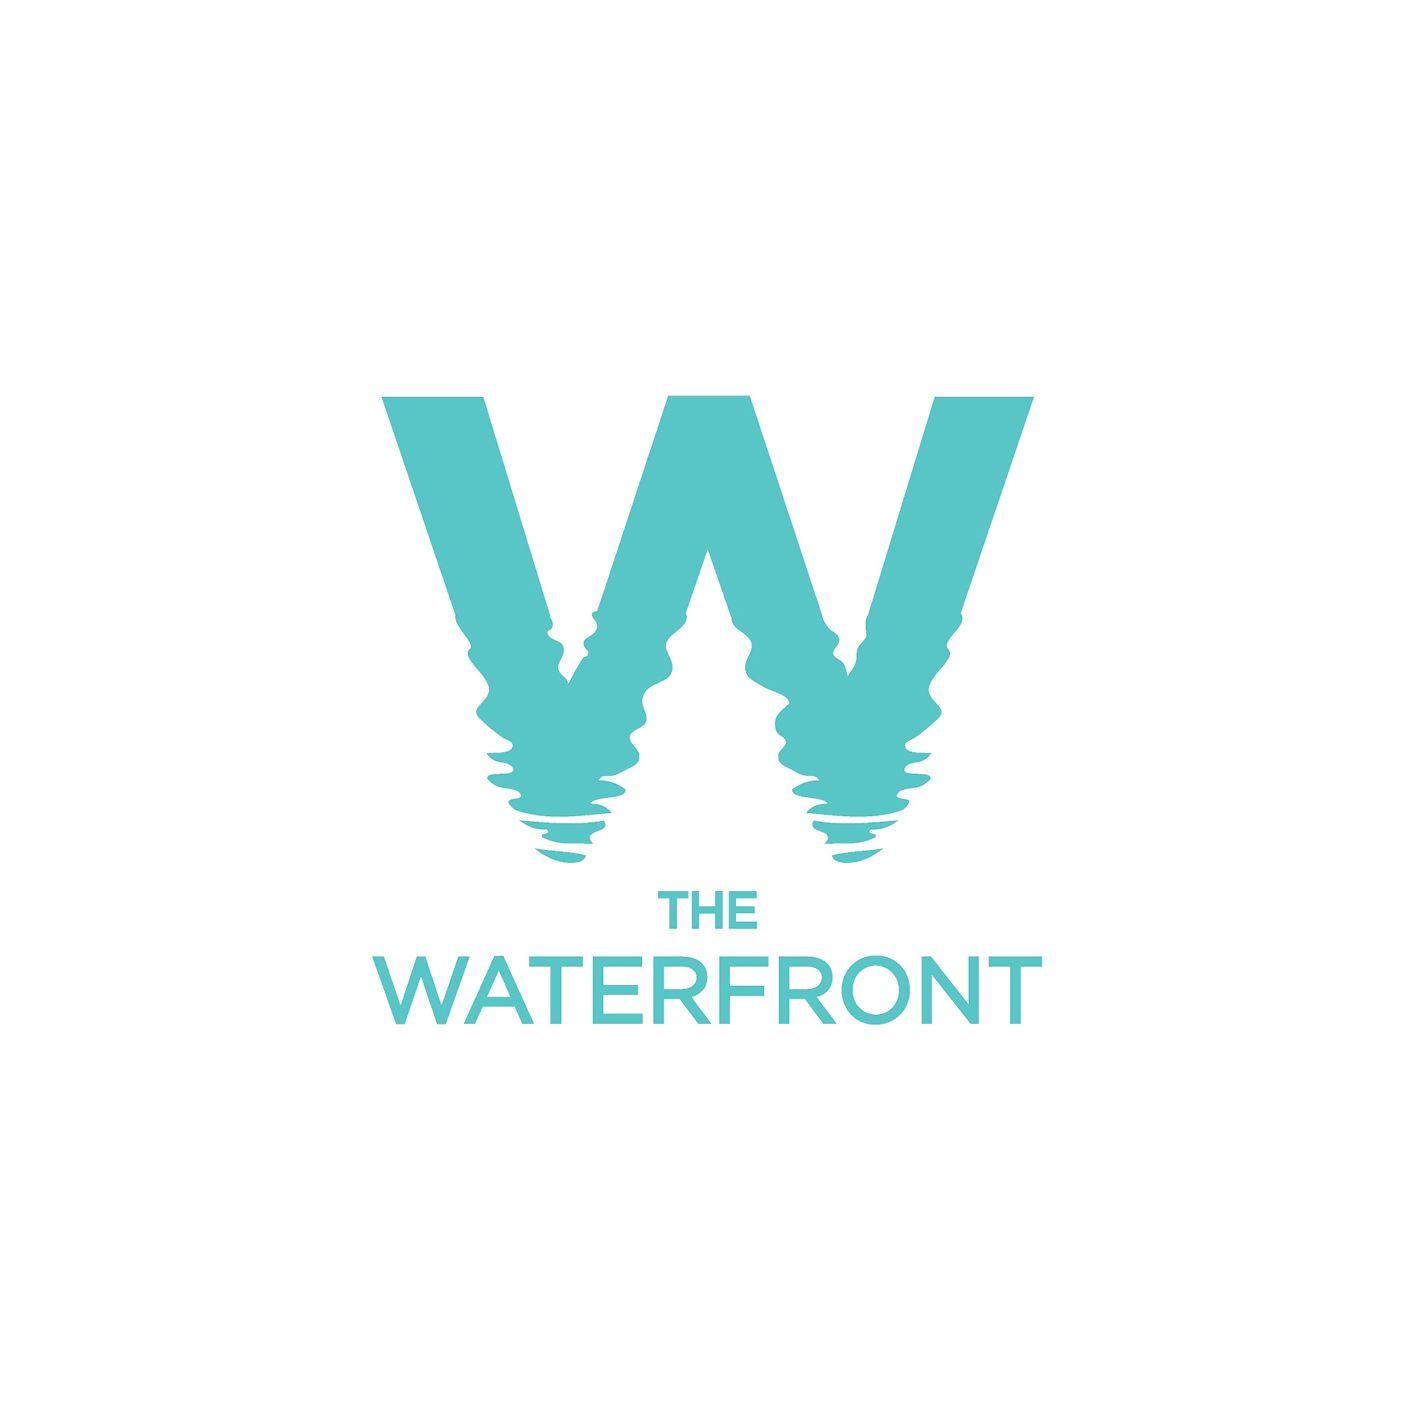 Abstract Water Logo - Given that water is such an important element of your work, thoughts ...